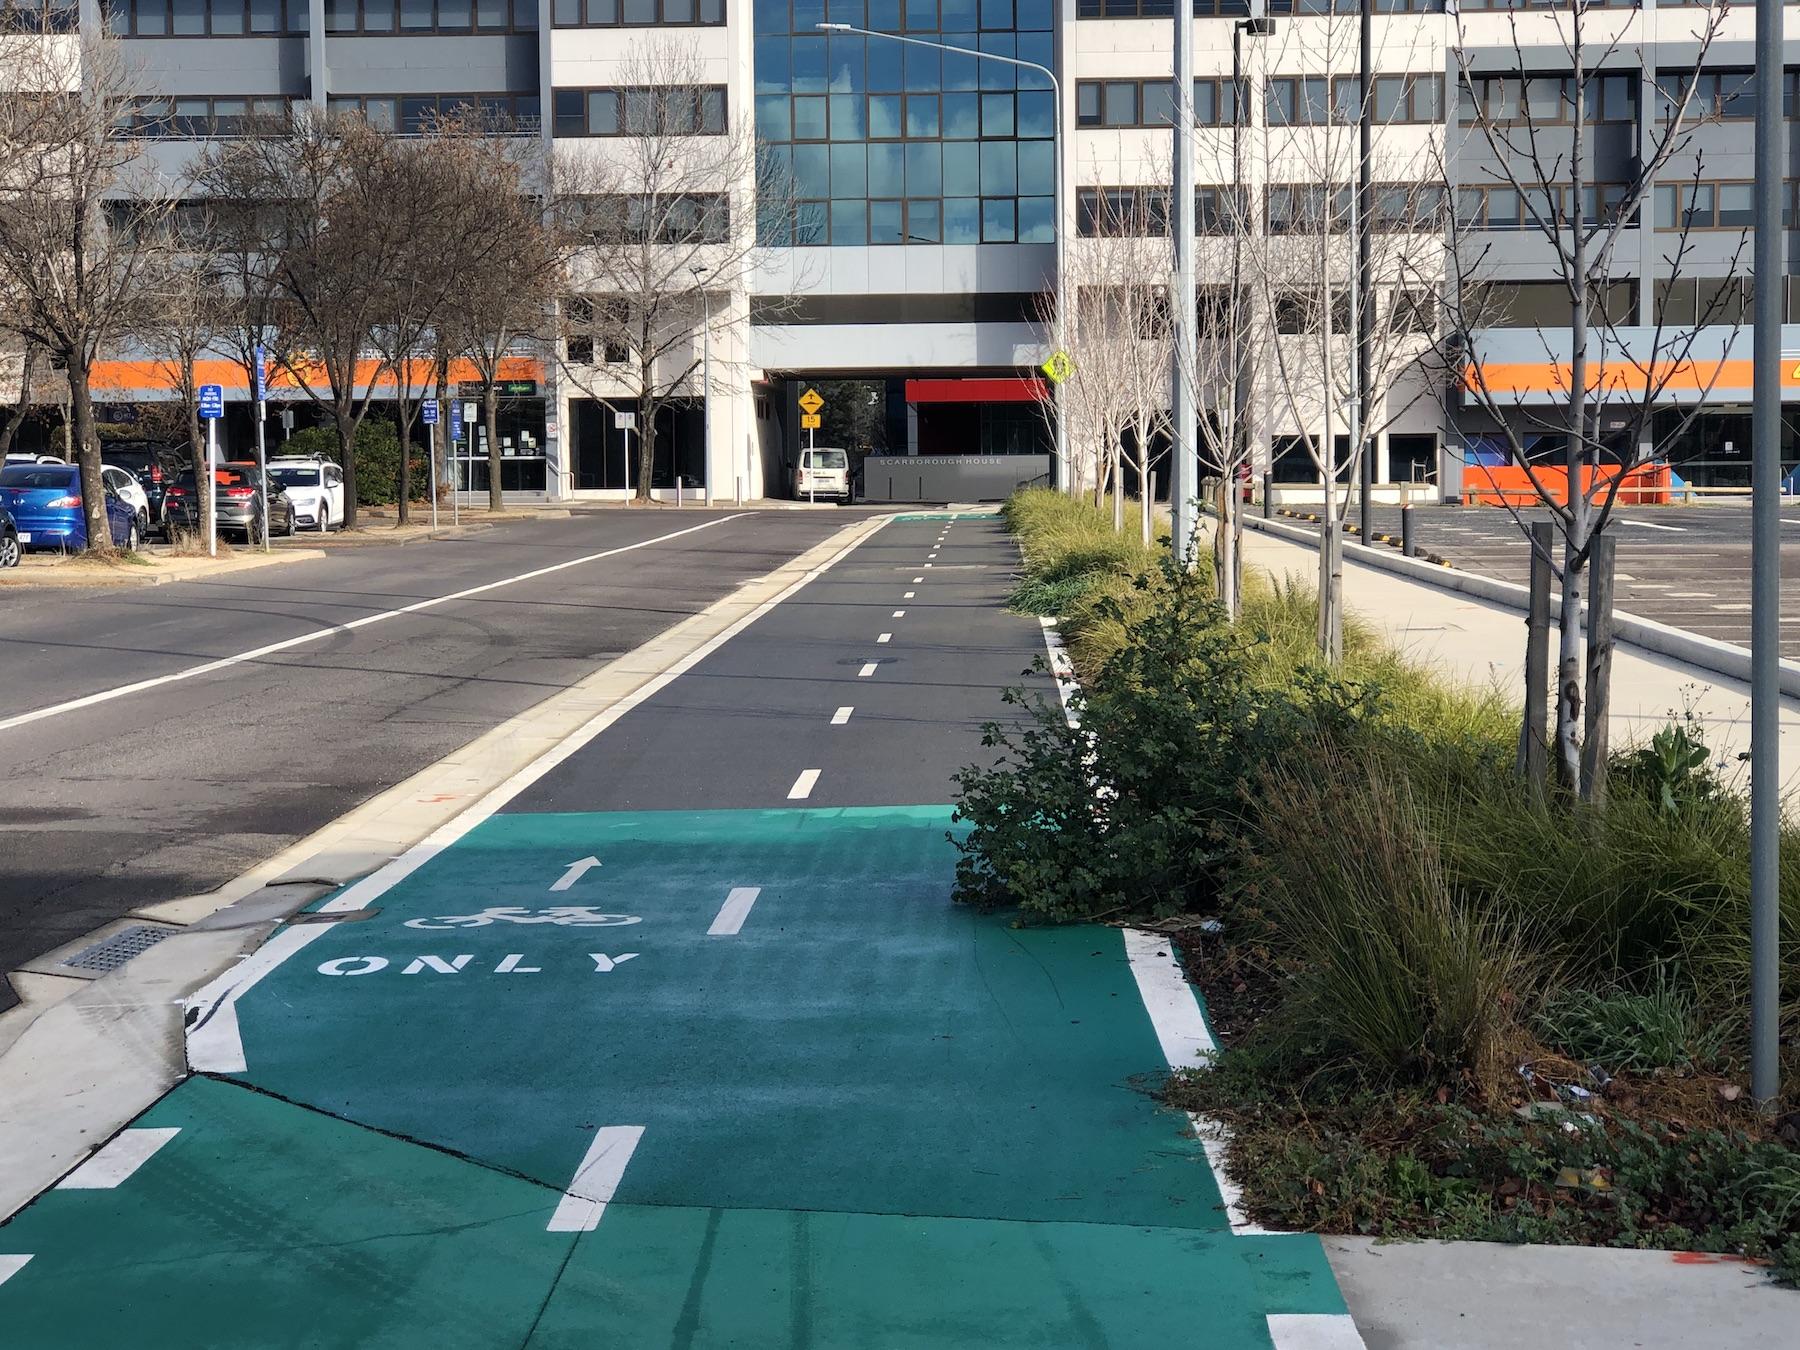 Image of a road with car lane on left side of image. In the middle of the image is a cycle lane, separated from the car lane by a raised kerb and painted green with a white bicycle symbol on it. To the right of the cycle lane are bushes separating it from a pedestrian footpath.